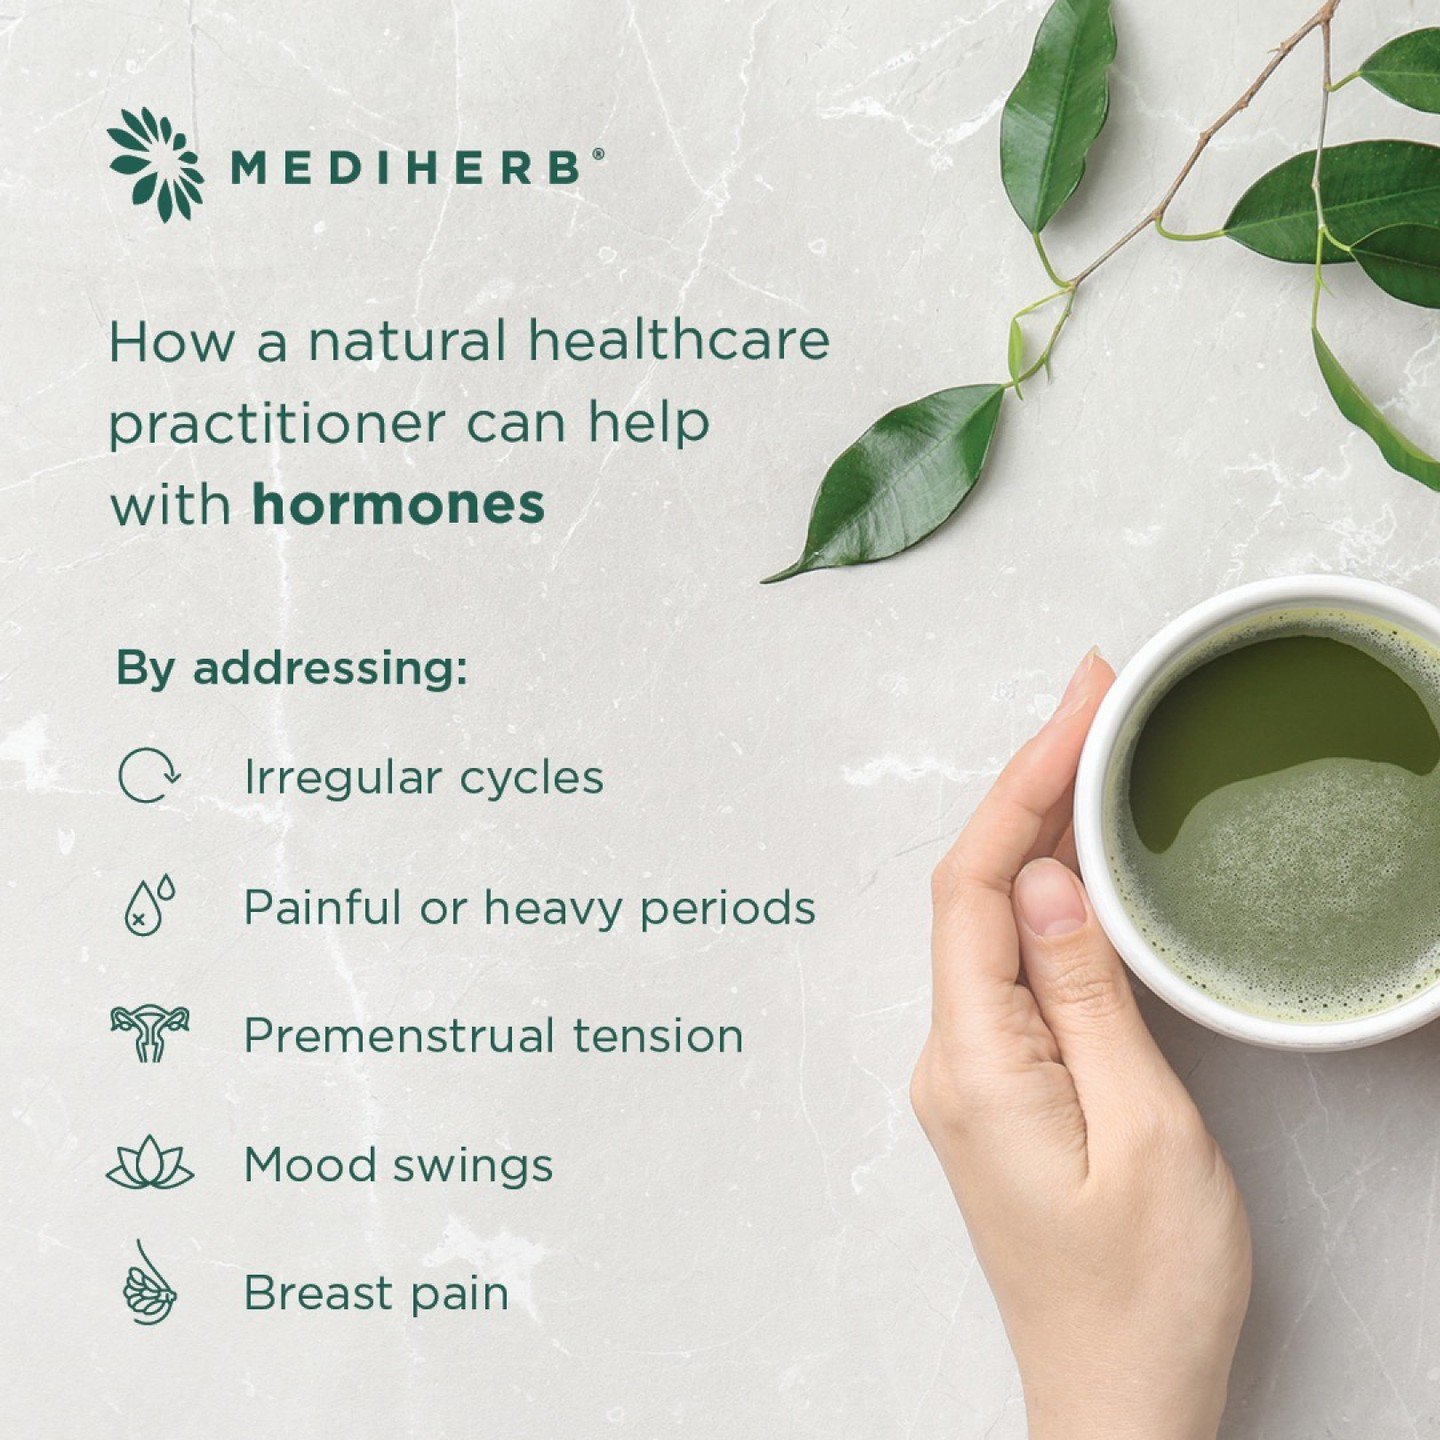 Oestrogen and progesterone naturally fluctuate during the menstrual cycle, however imbalances in hormones may exacerbate premenstrual tension and period-related symptoms.

The delicate balance of hormones is influenced by many factors including your 